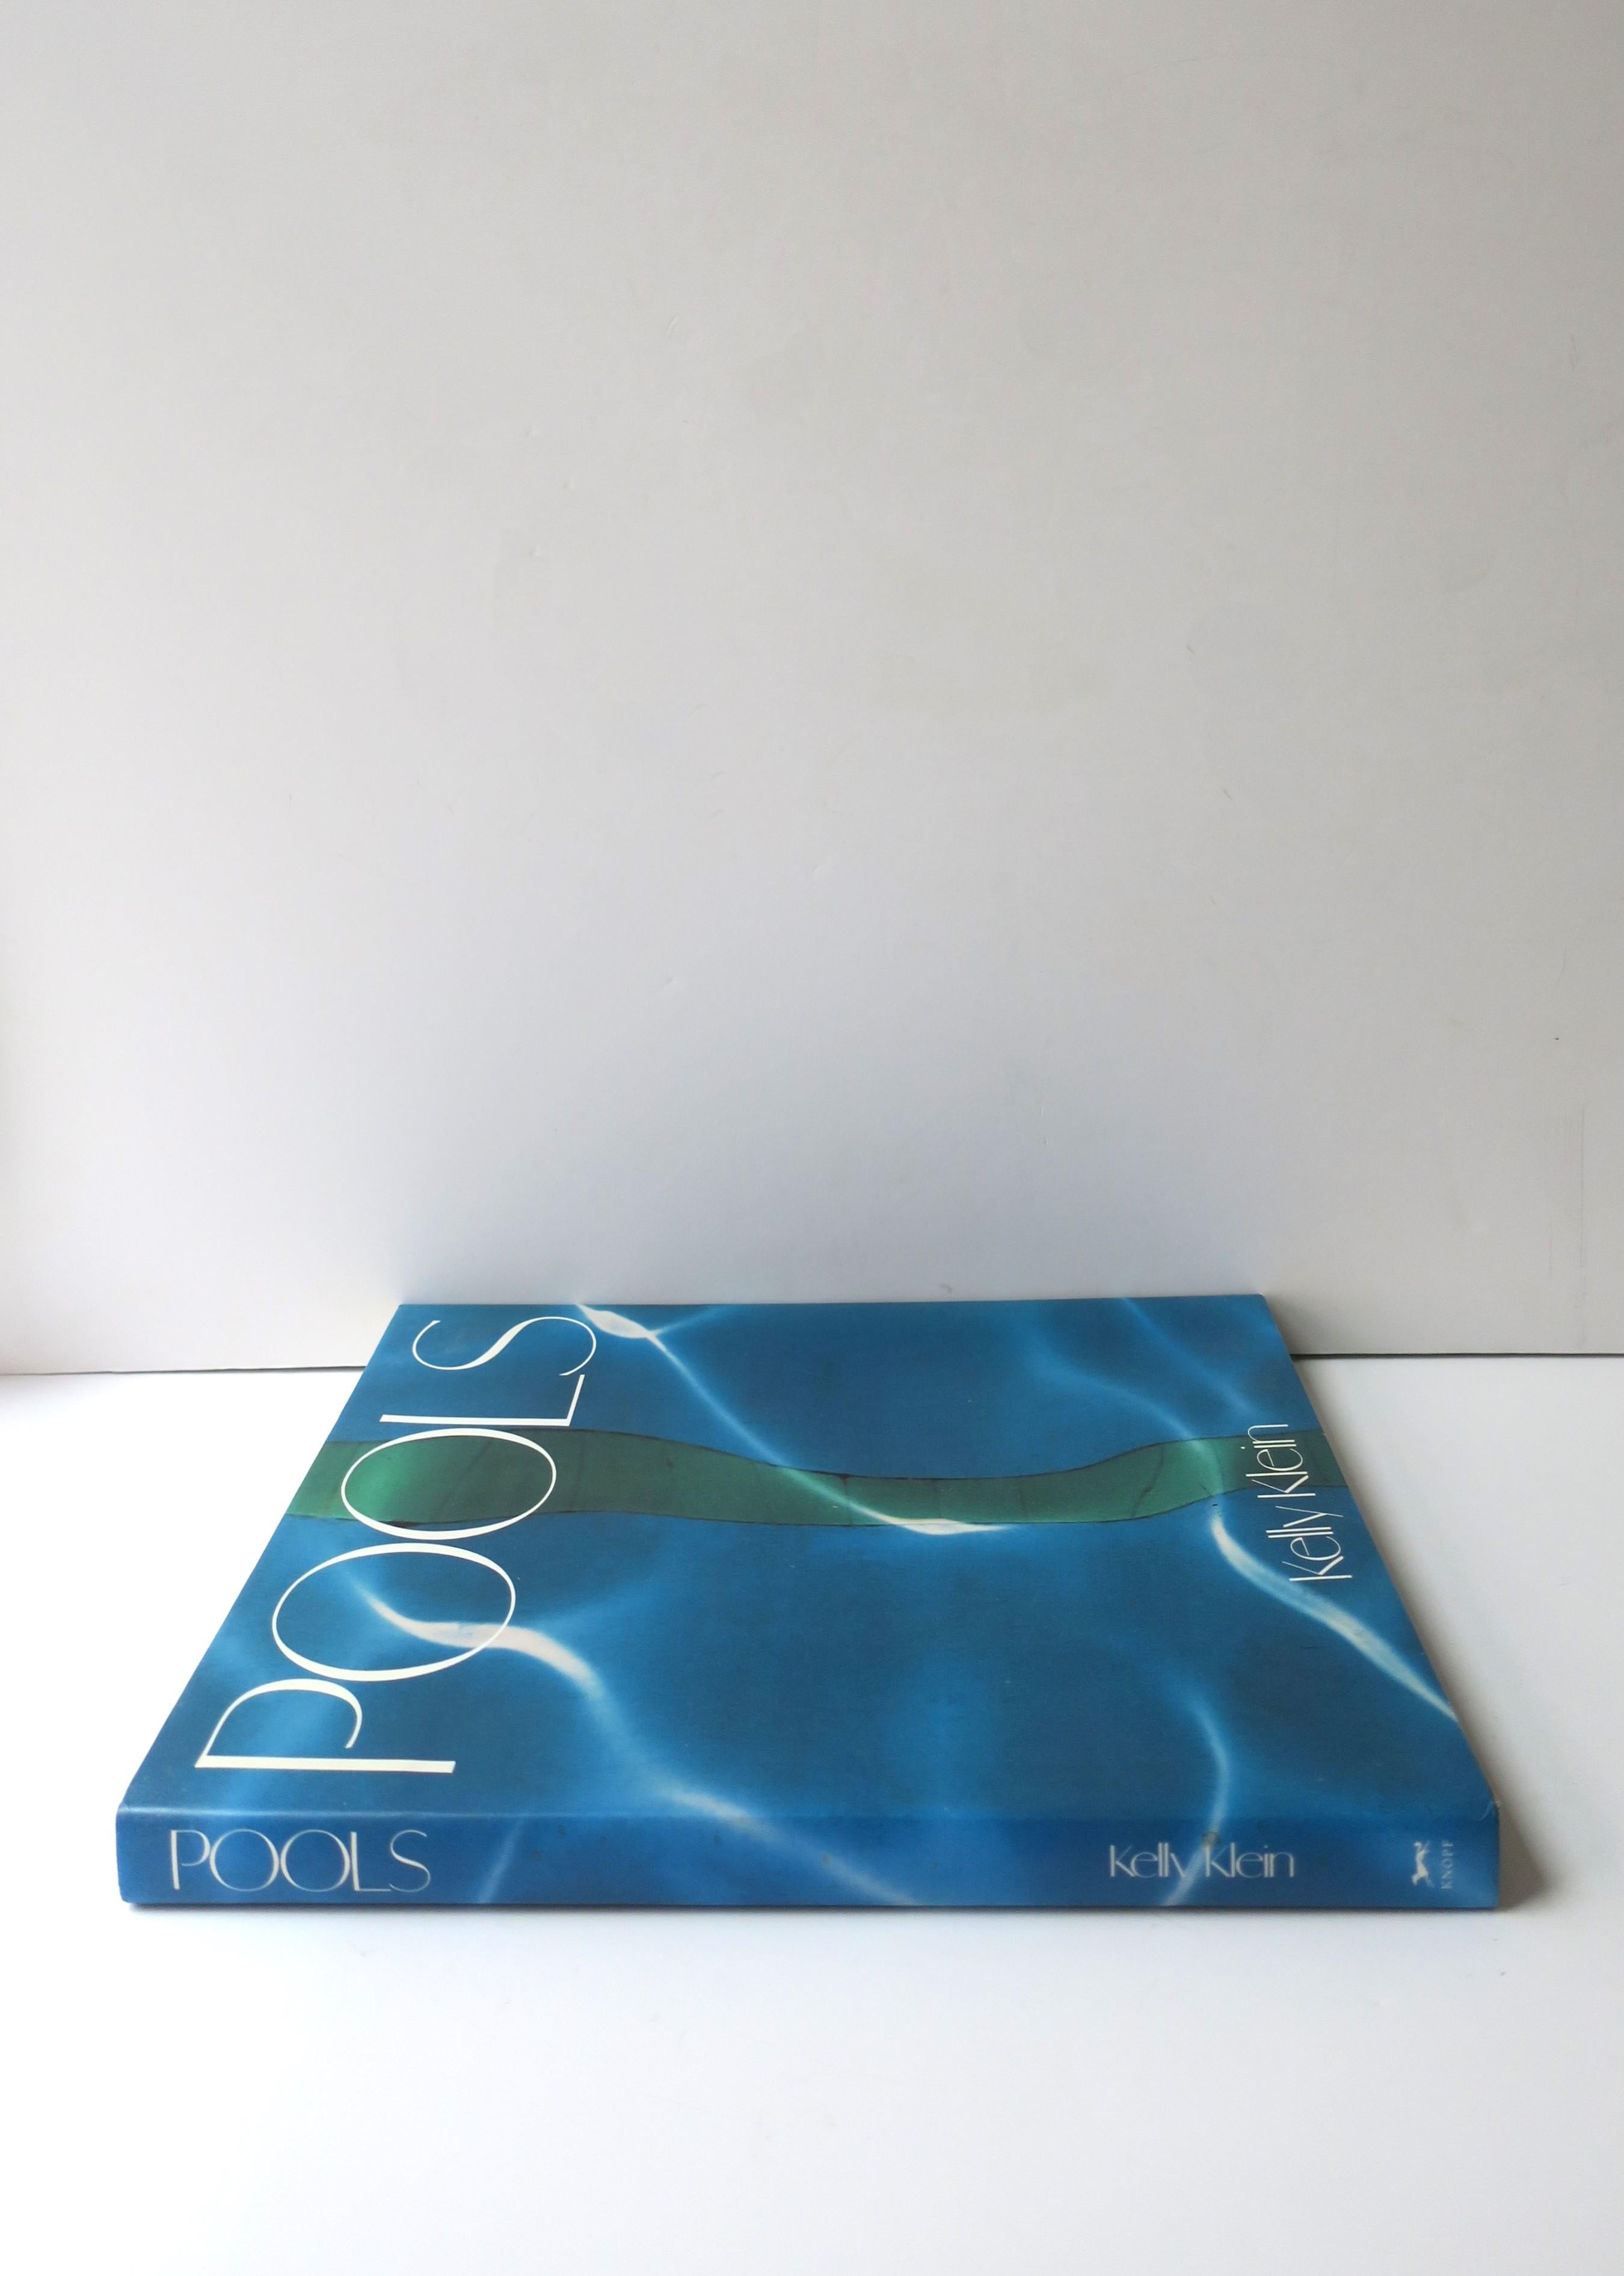 Paper Pools by Kelly Klein an Architecture Coffee Table or Library Book, 1992 For Sale